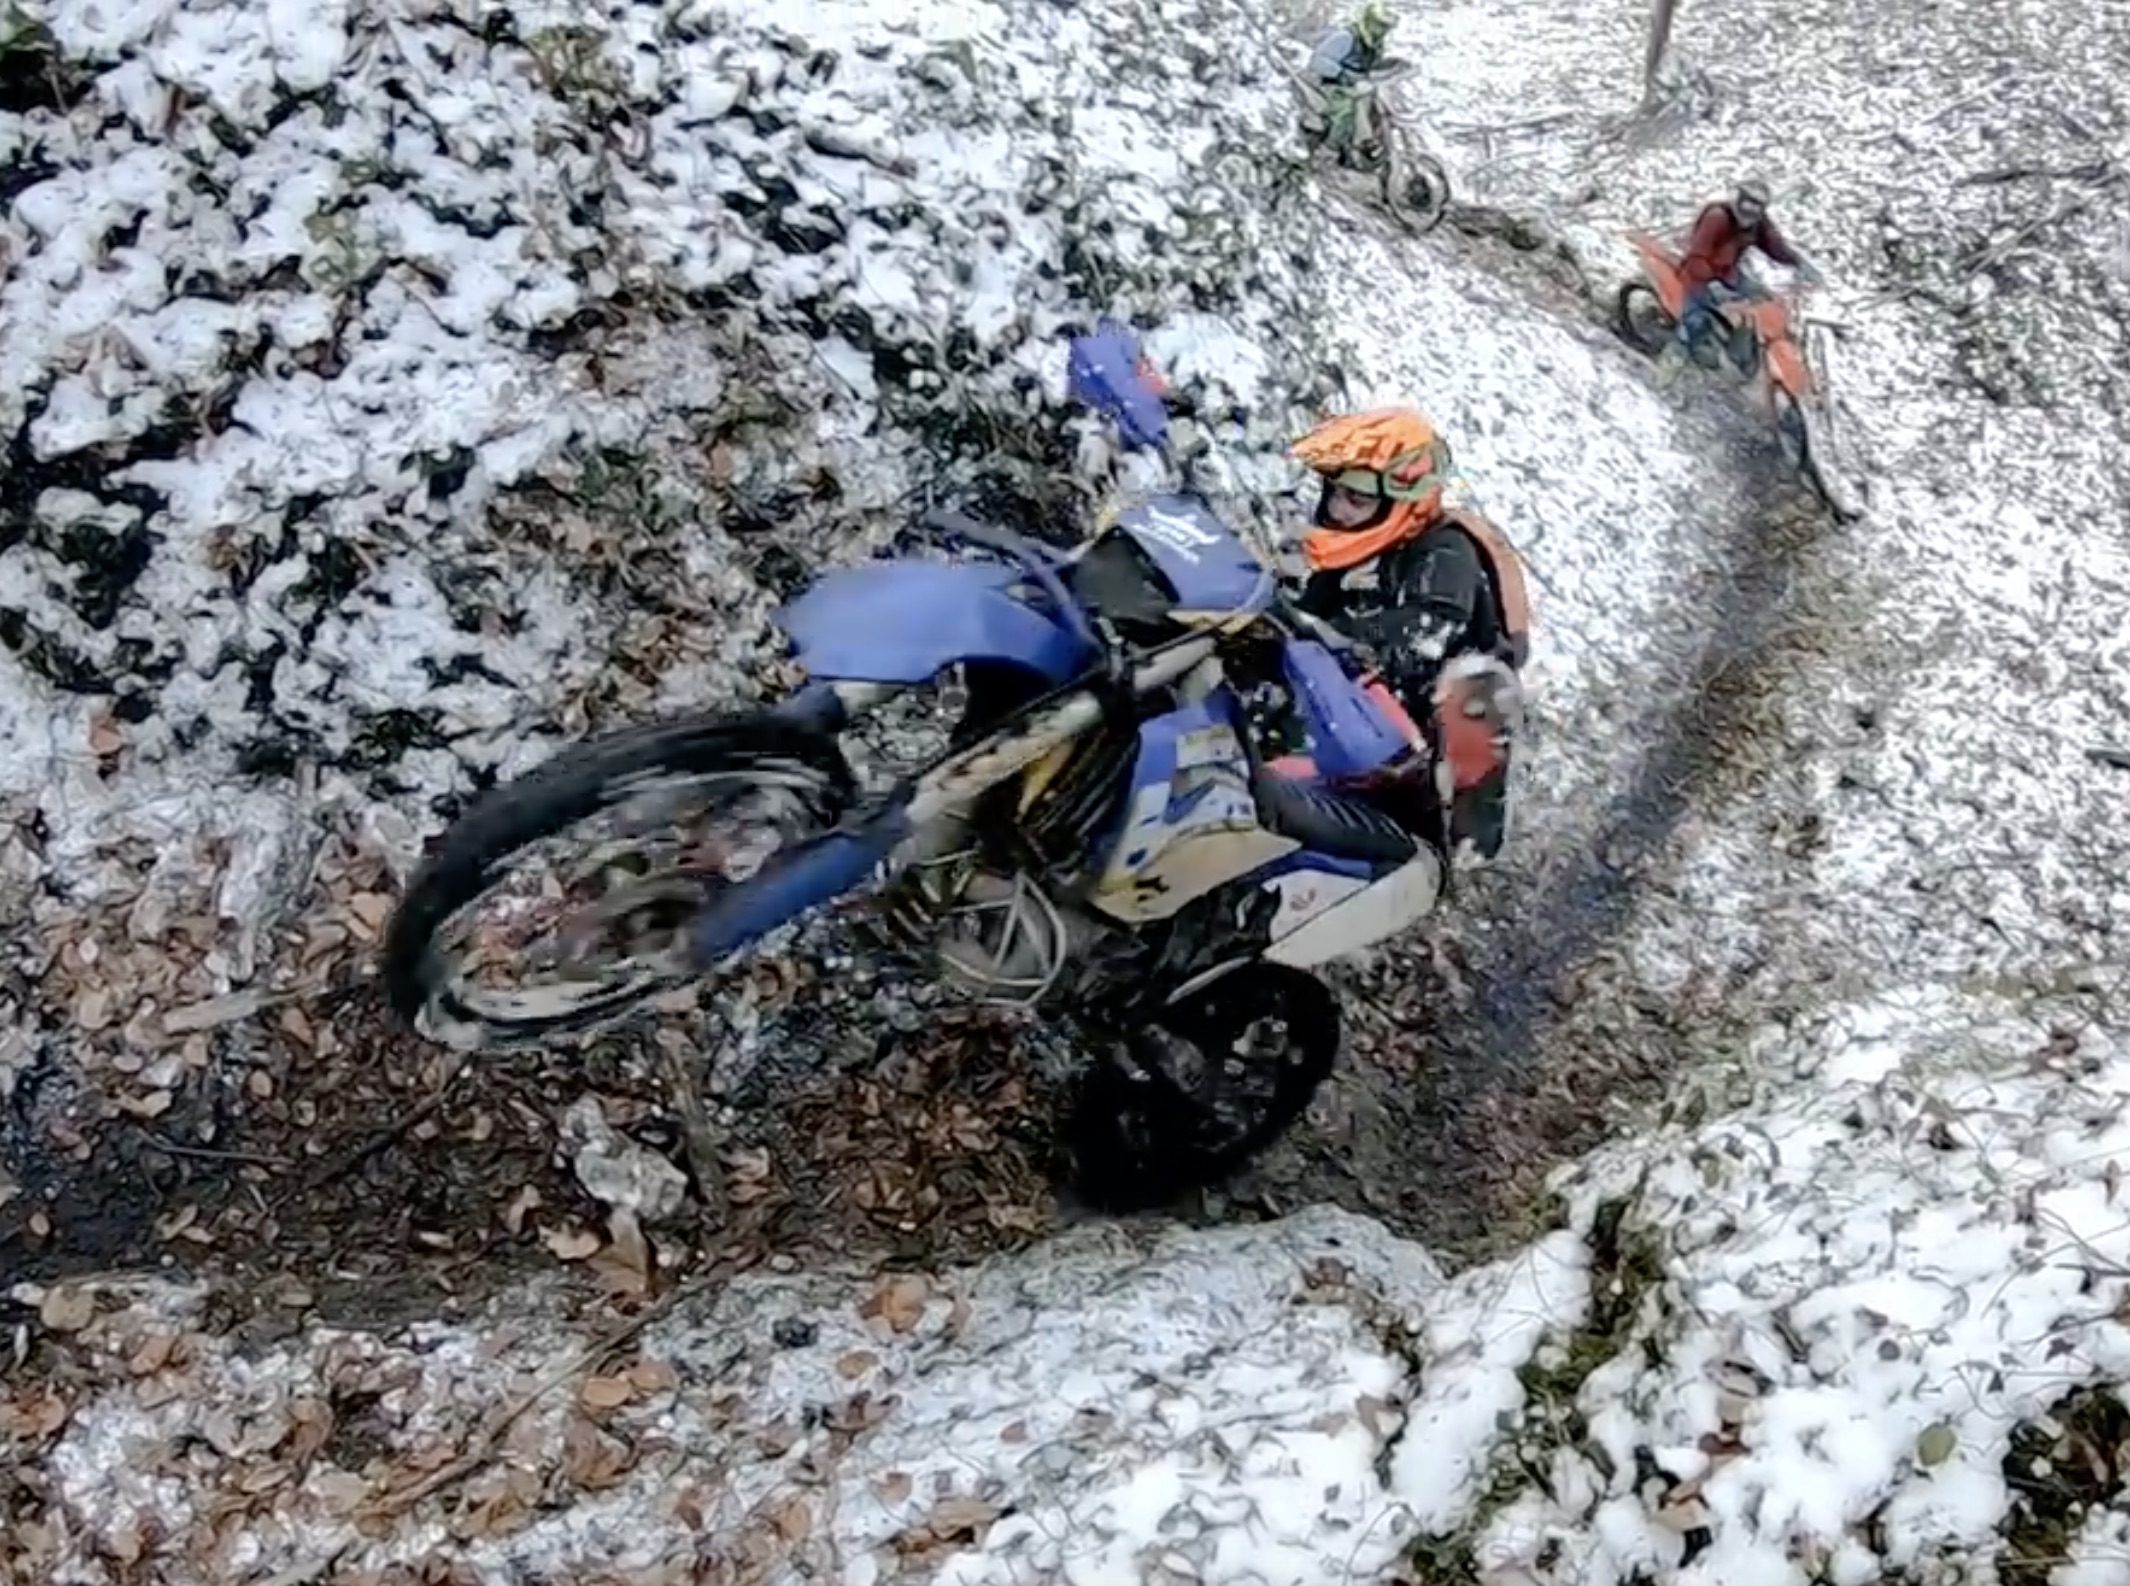 These Motocross Riders Are Insane – Like Rockbouncers, But Without The Rollcage!